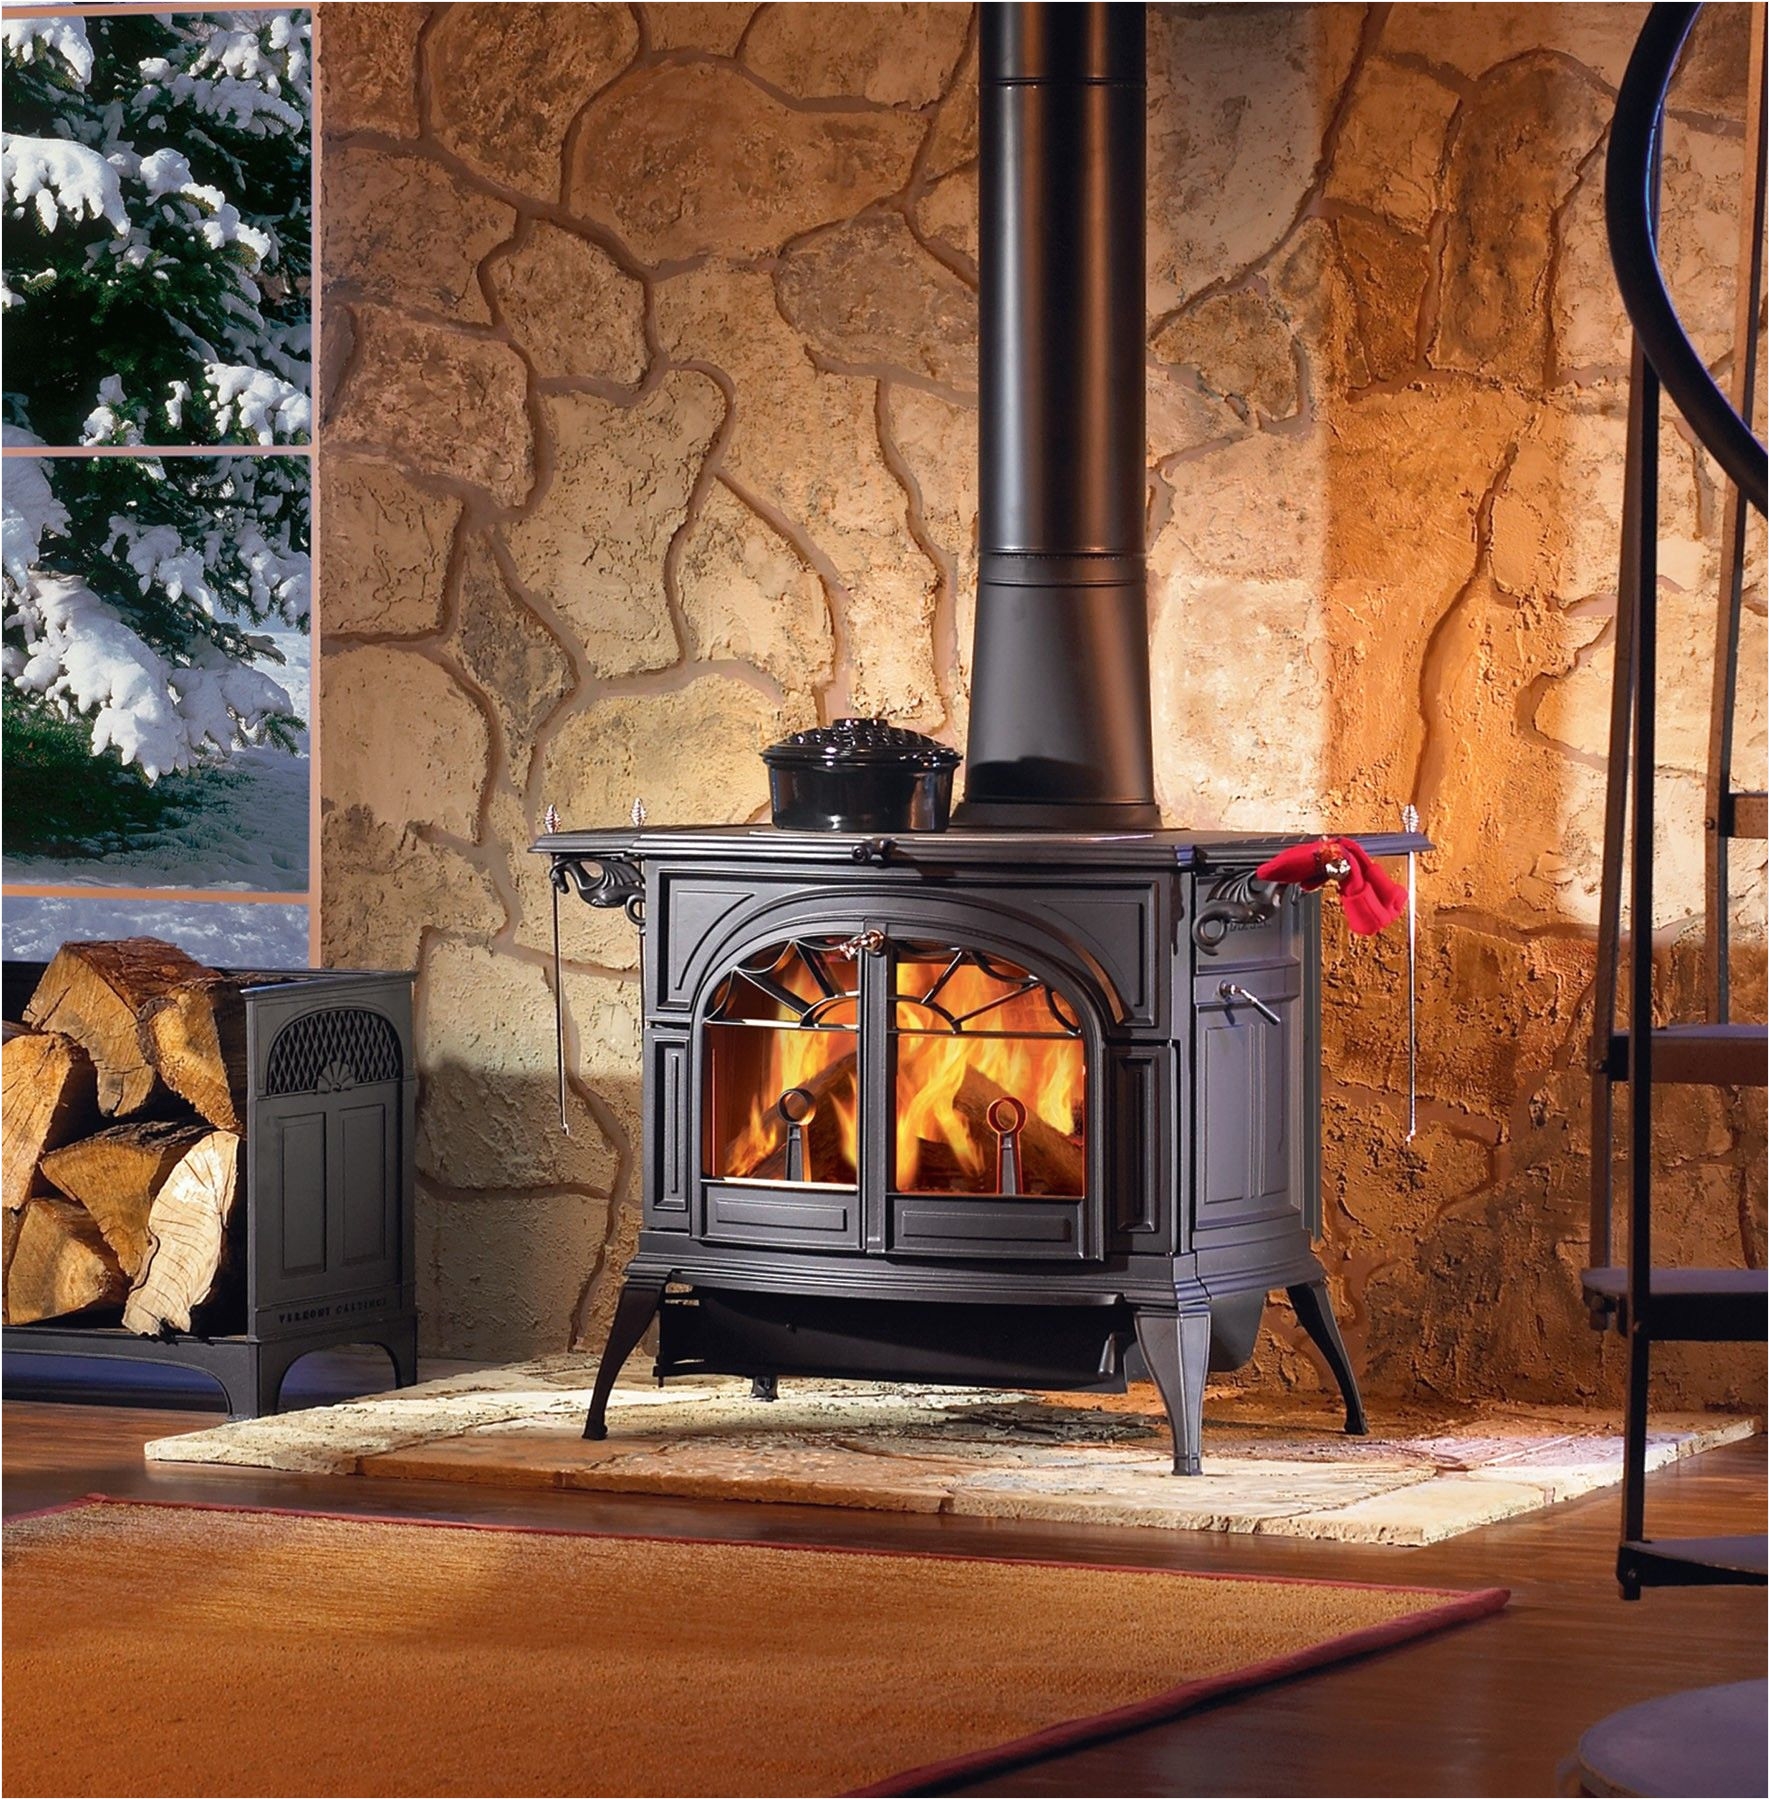 wel e to in season fireplaces